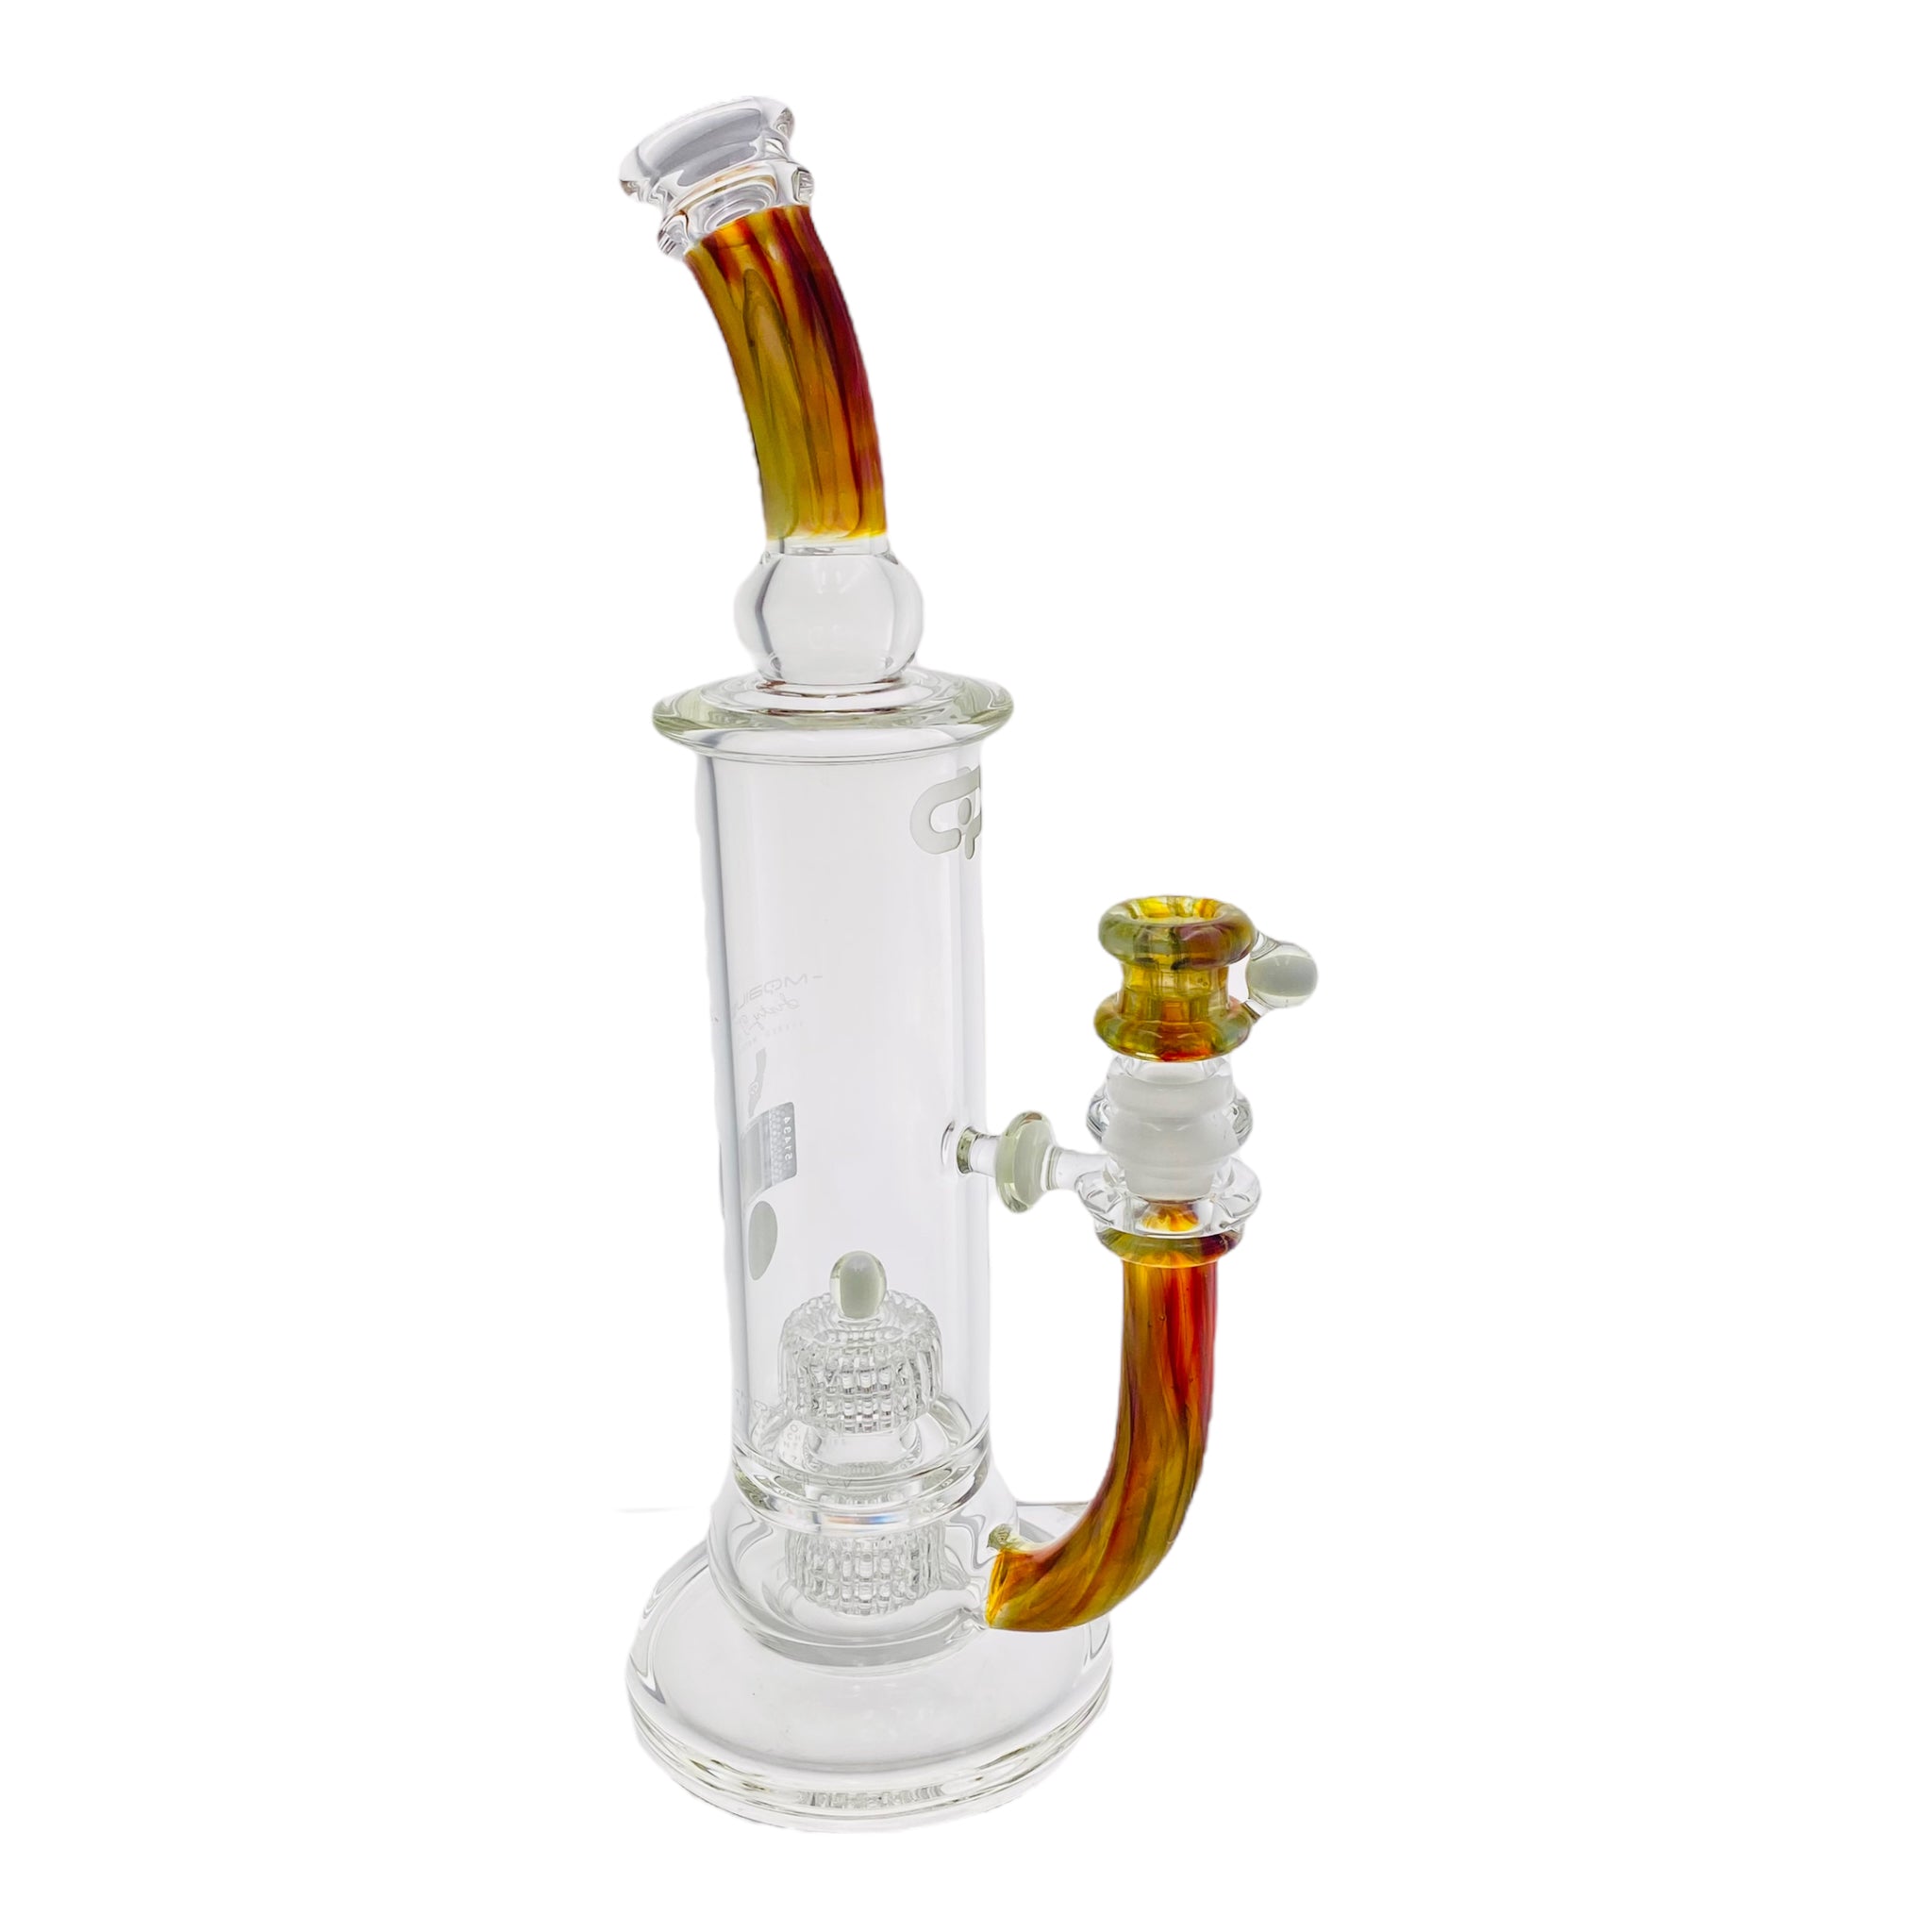 Mobius Glass - Custom 60T V5 - Accent Series #17 of 2023